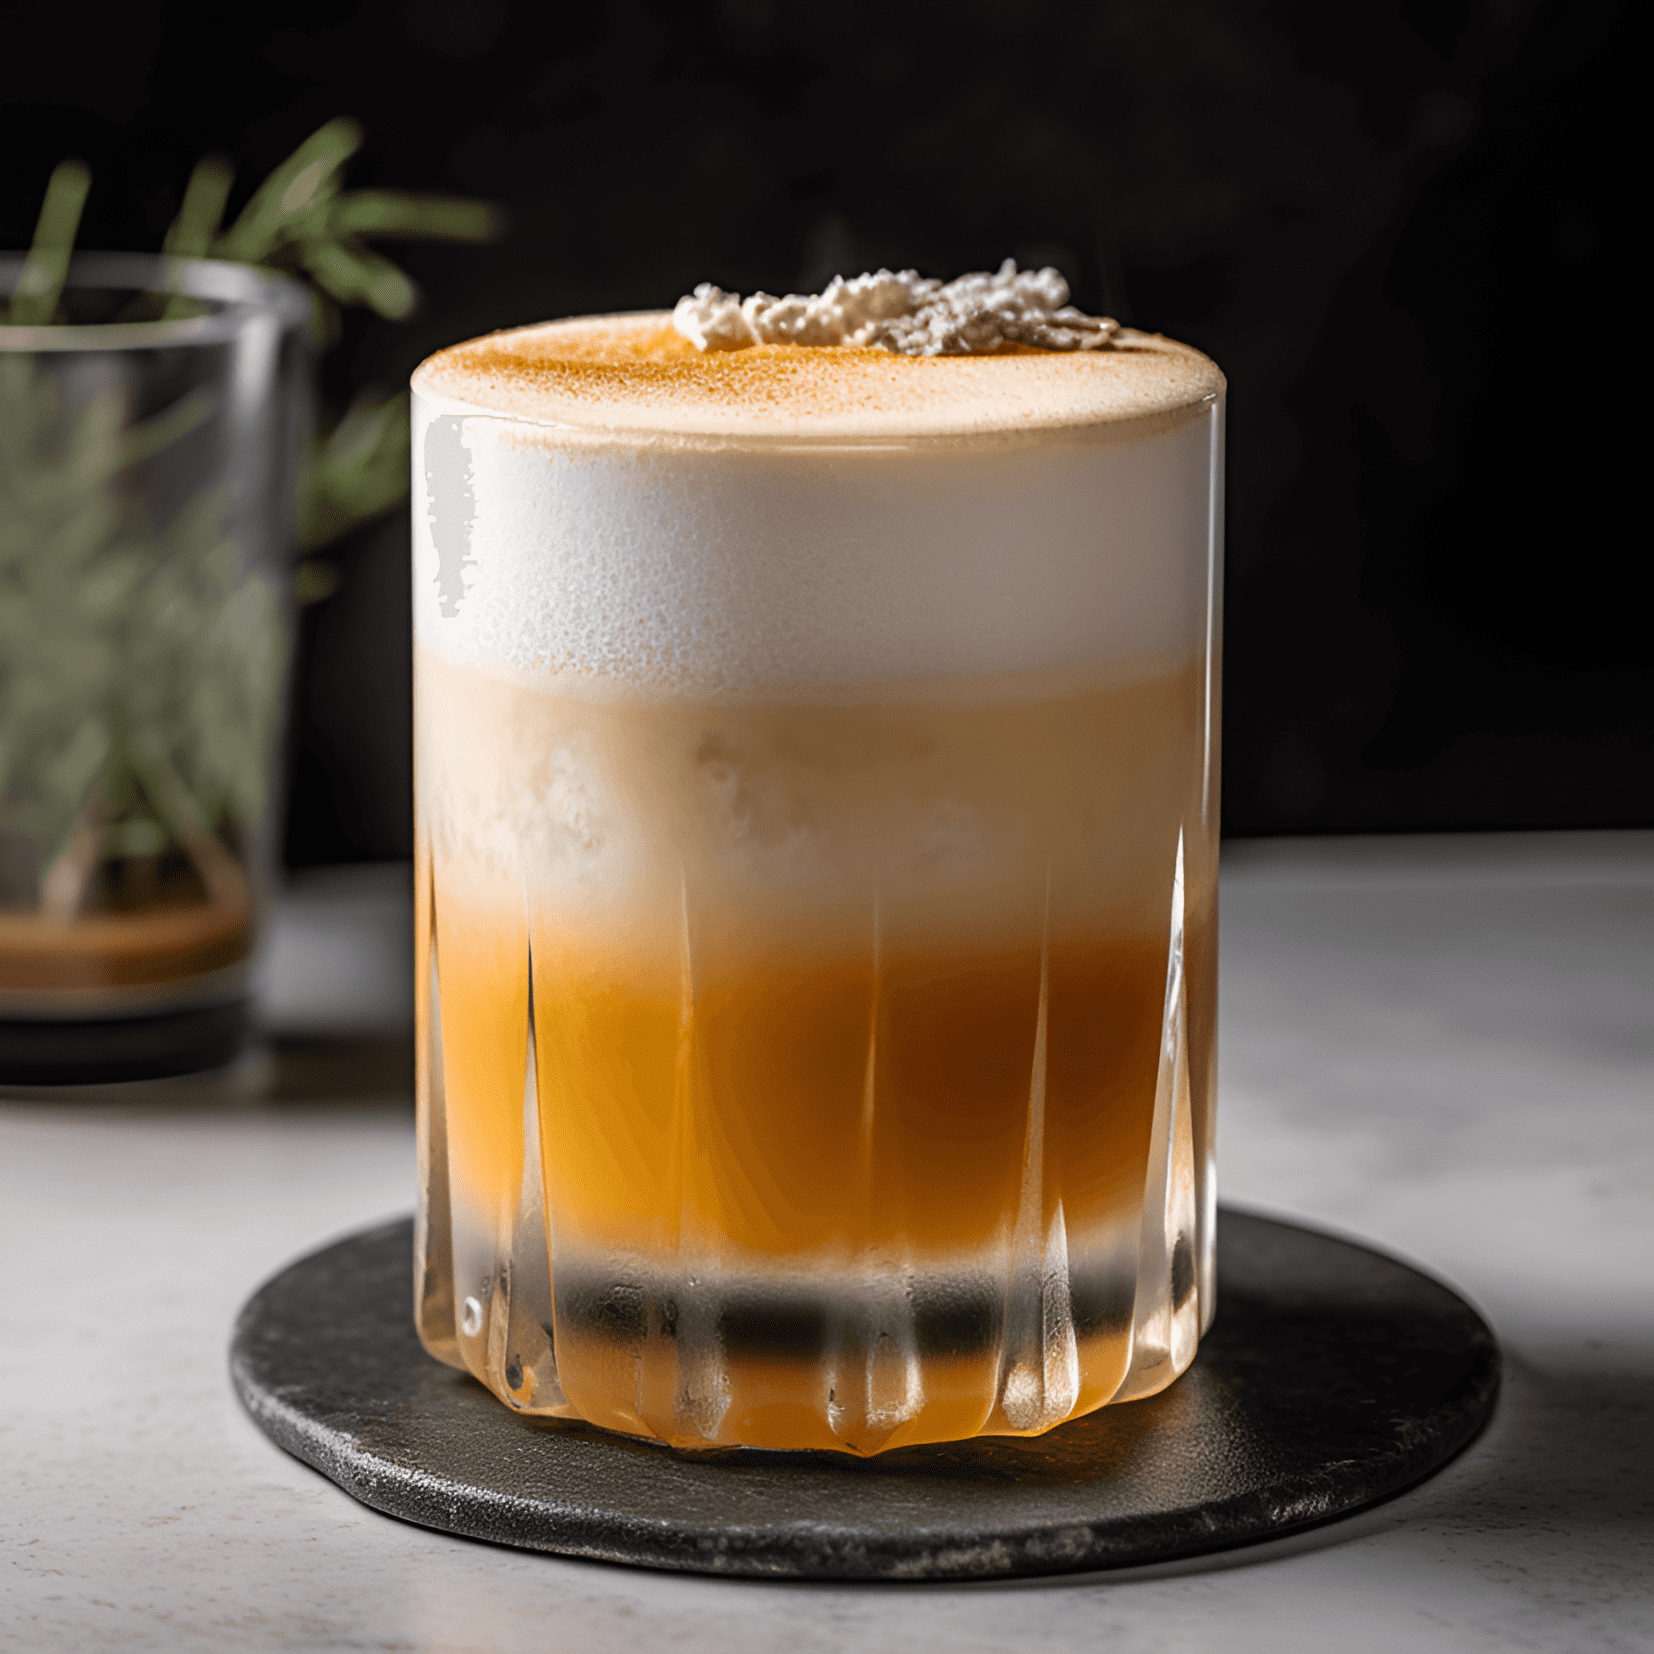 Bourbon Sour Cocktail Recipe - The Bourbon Sour is a harmonious blend of sweet, sour, and strong flavors. The bourbon provides a robust, oaky backbone, while the lemon juice adds a bright, tangy note. The simple syrup balances the sourness with a touch of sweetness, and the egg white creates a velvety, smooth texture.